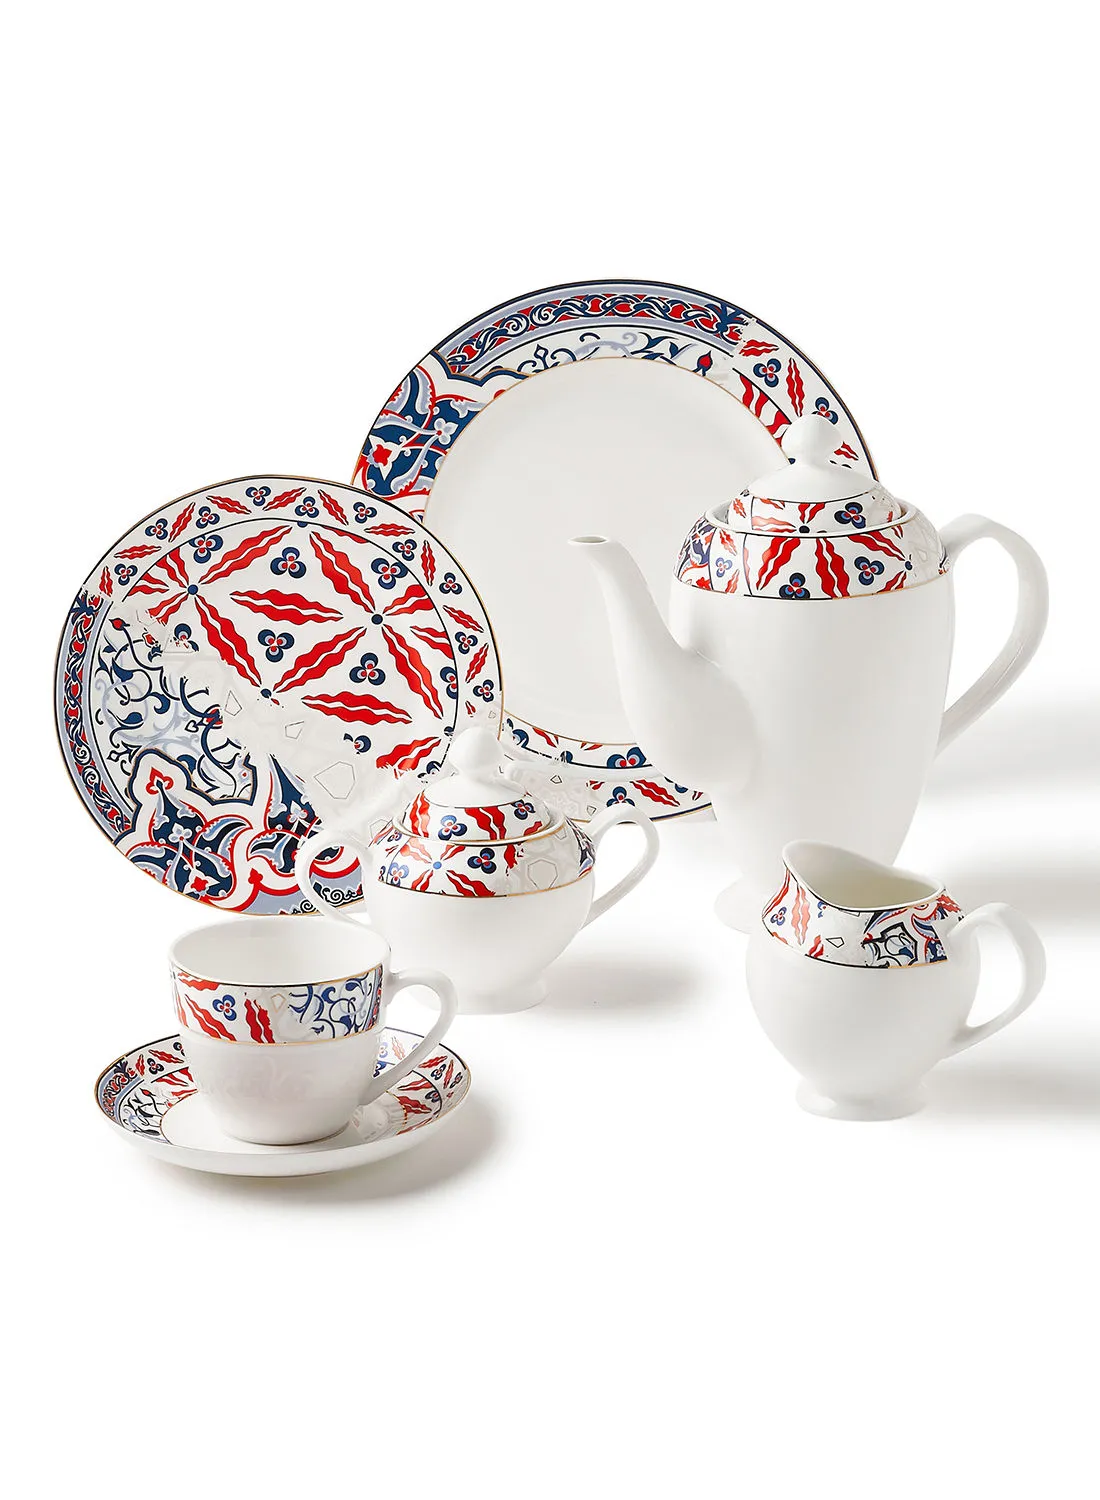 noon east 70 Piece Ceramic Dinner Set Premium Quality - Dishes, Plates - Dinner Plate, Side Plate, Bowl, Cups, Serving Dish And Bowl - Serves 12 - Festive Design Arabian Montage